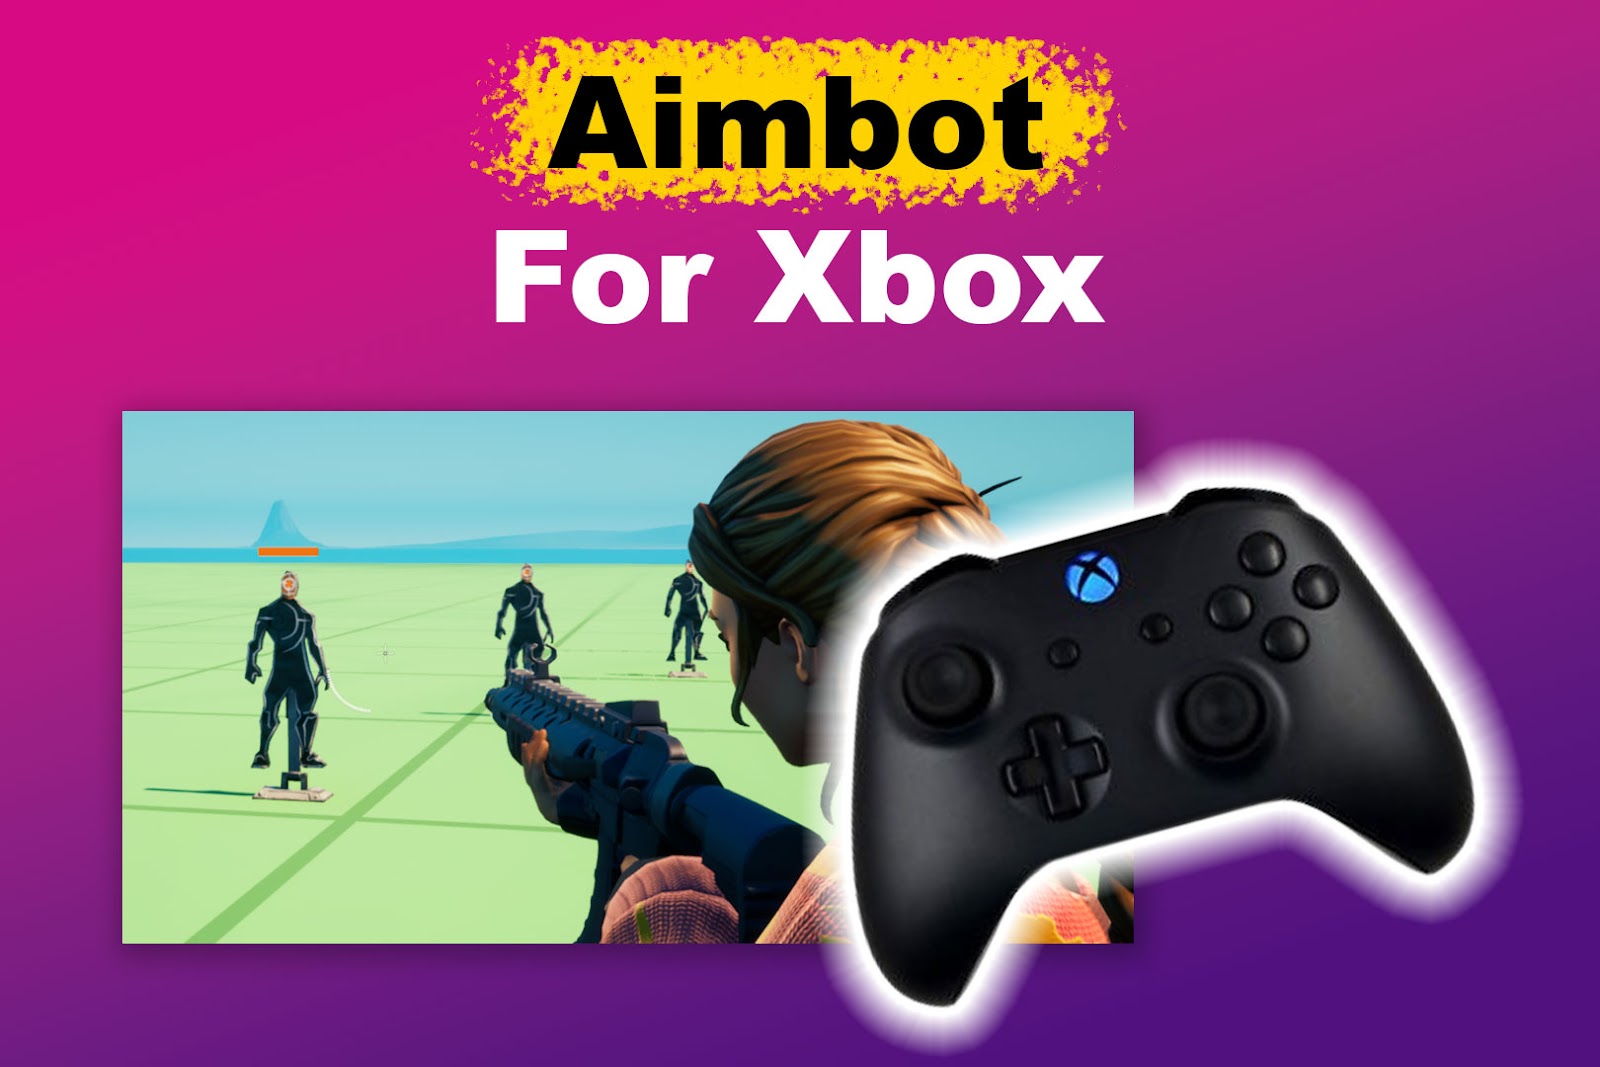 How to Get Aimbot on Xbox?